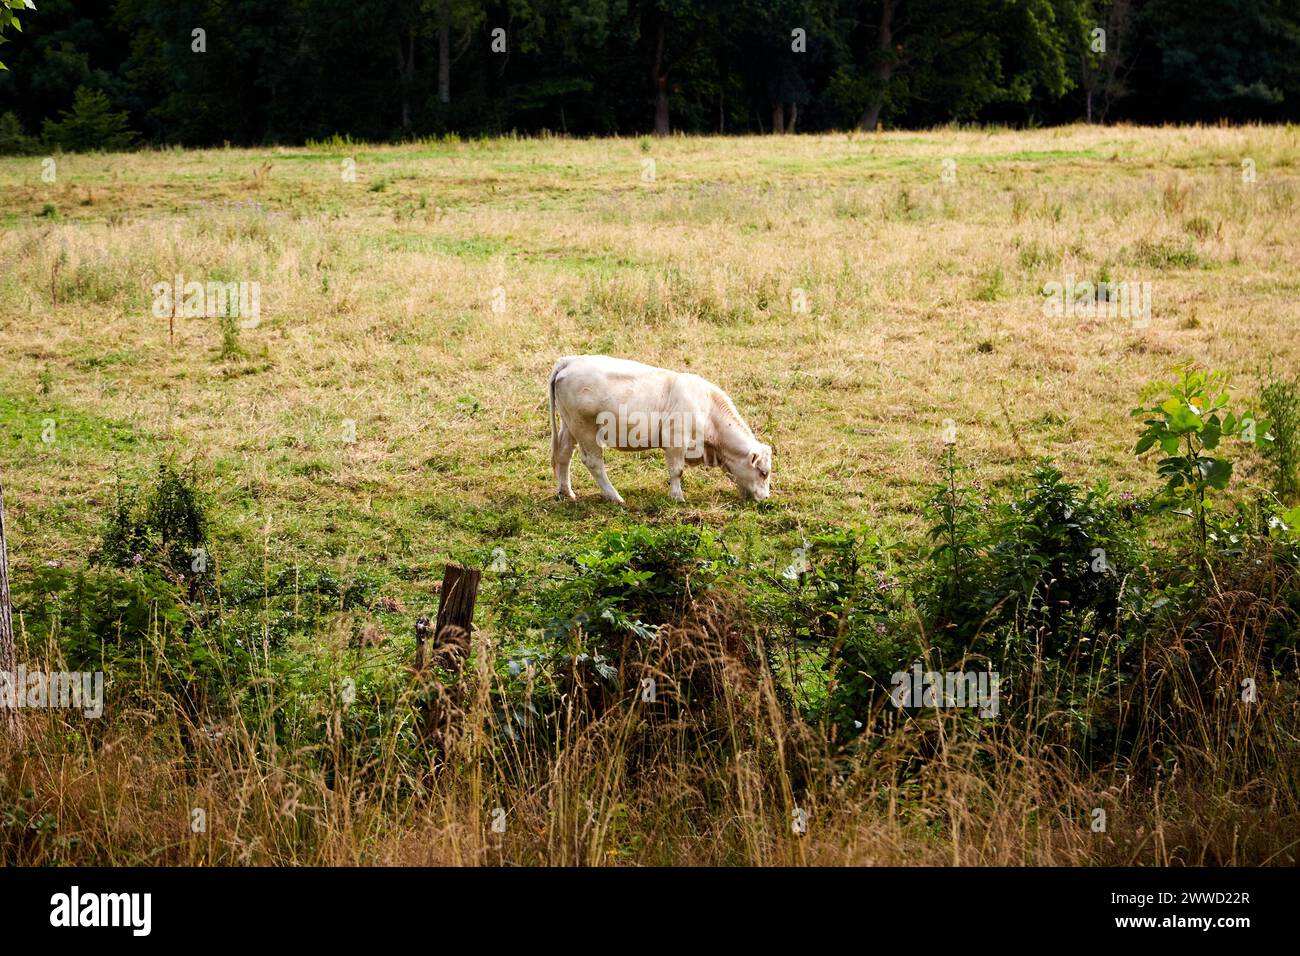 Single White Charolais Cow Standing and Grazing in a Field Stock Photo